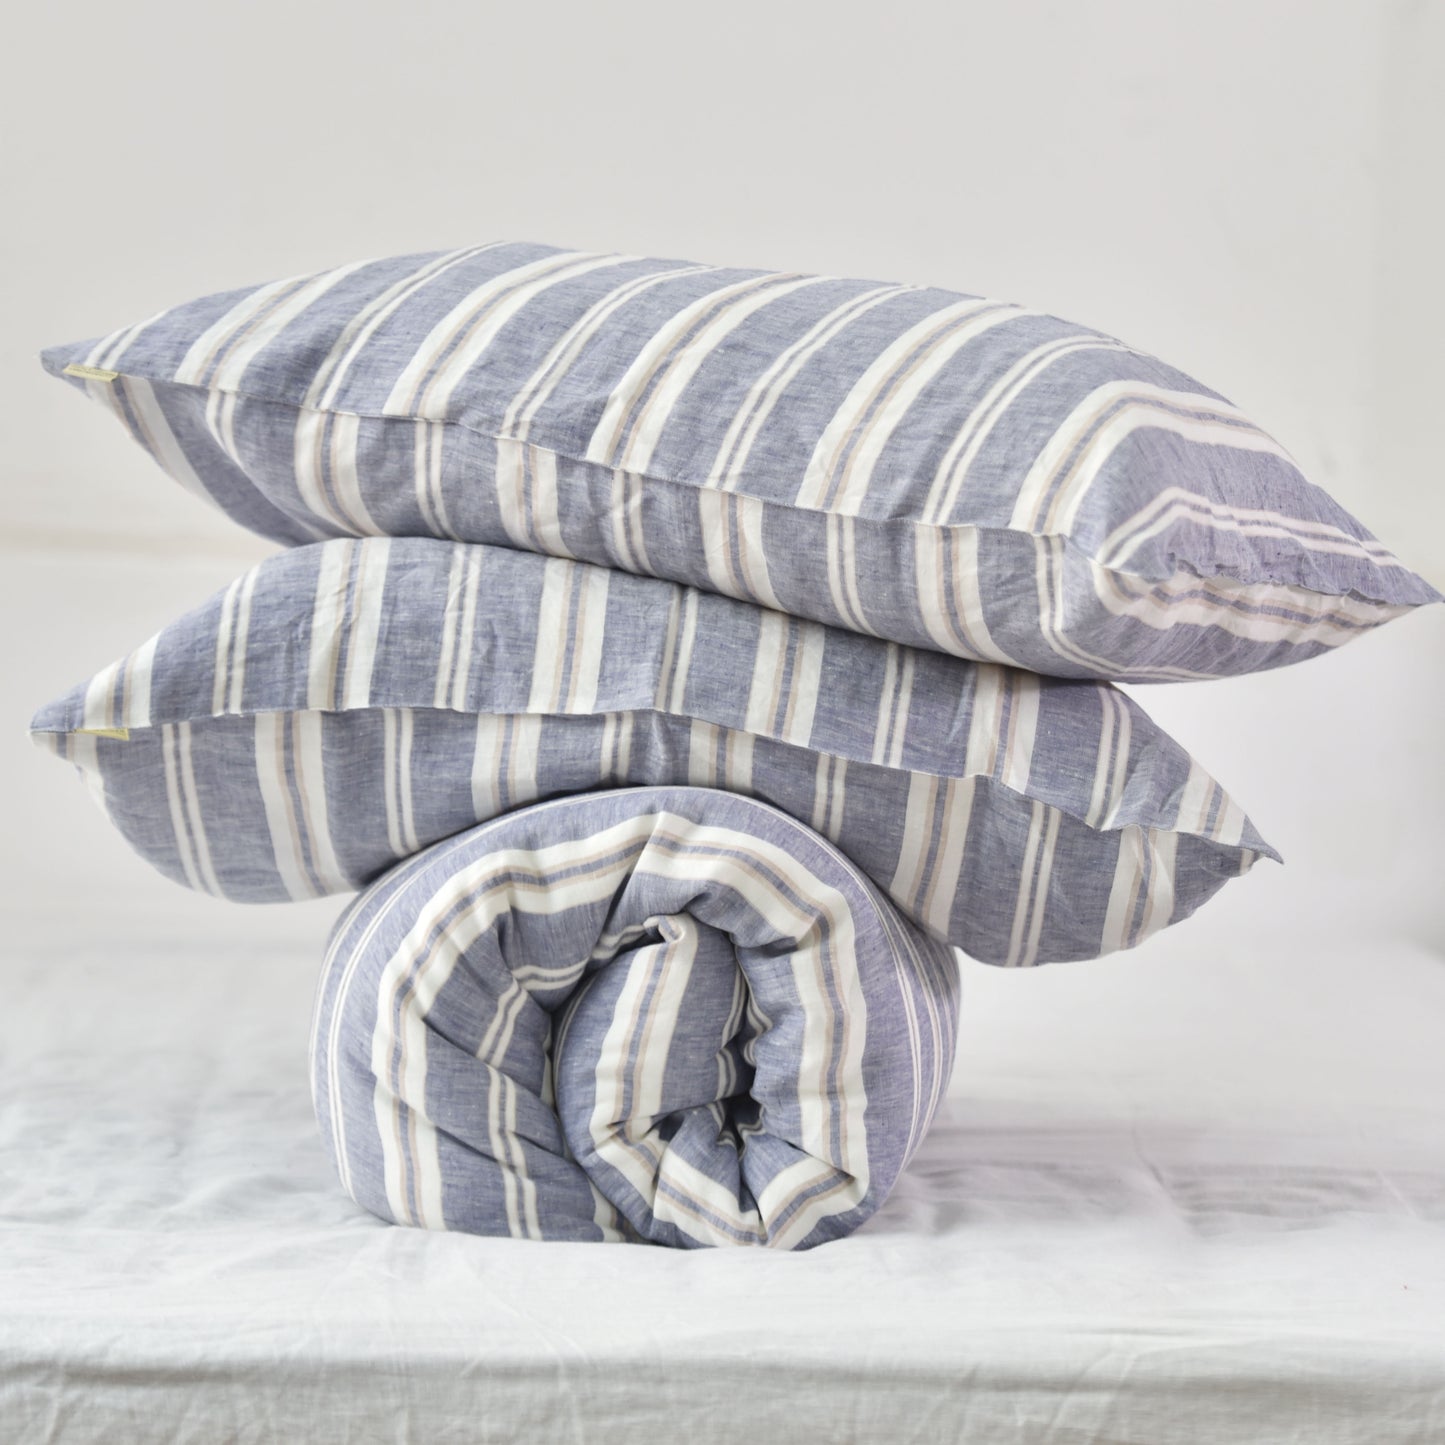 Wide Striped French Linen Duvet Cover+2 Pillowcases Set - Yarn Dyeing 55